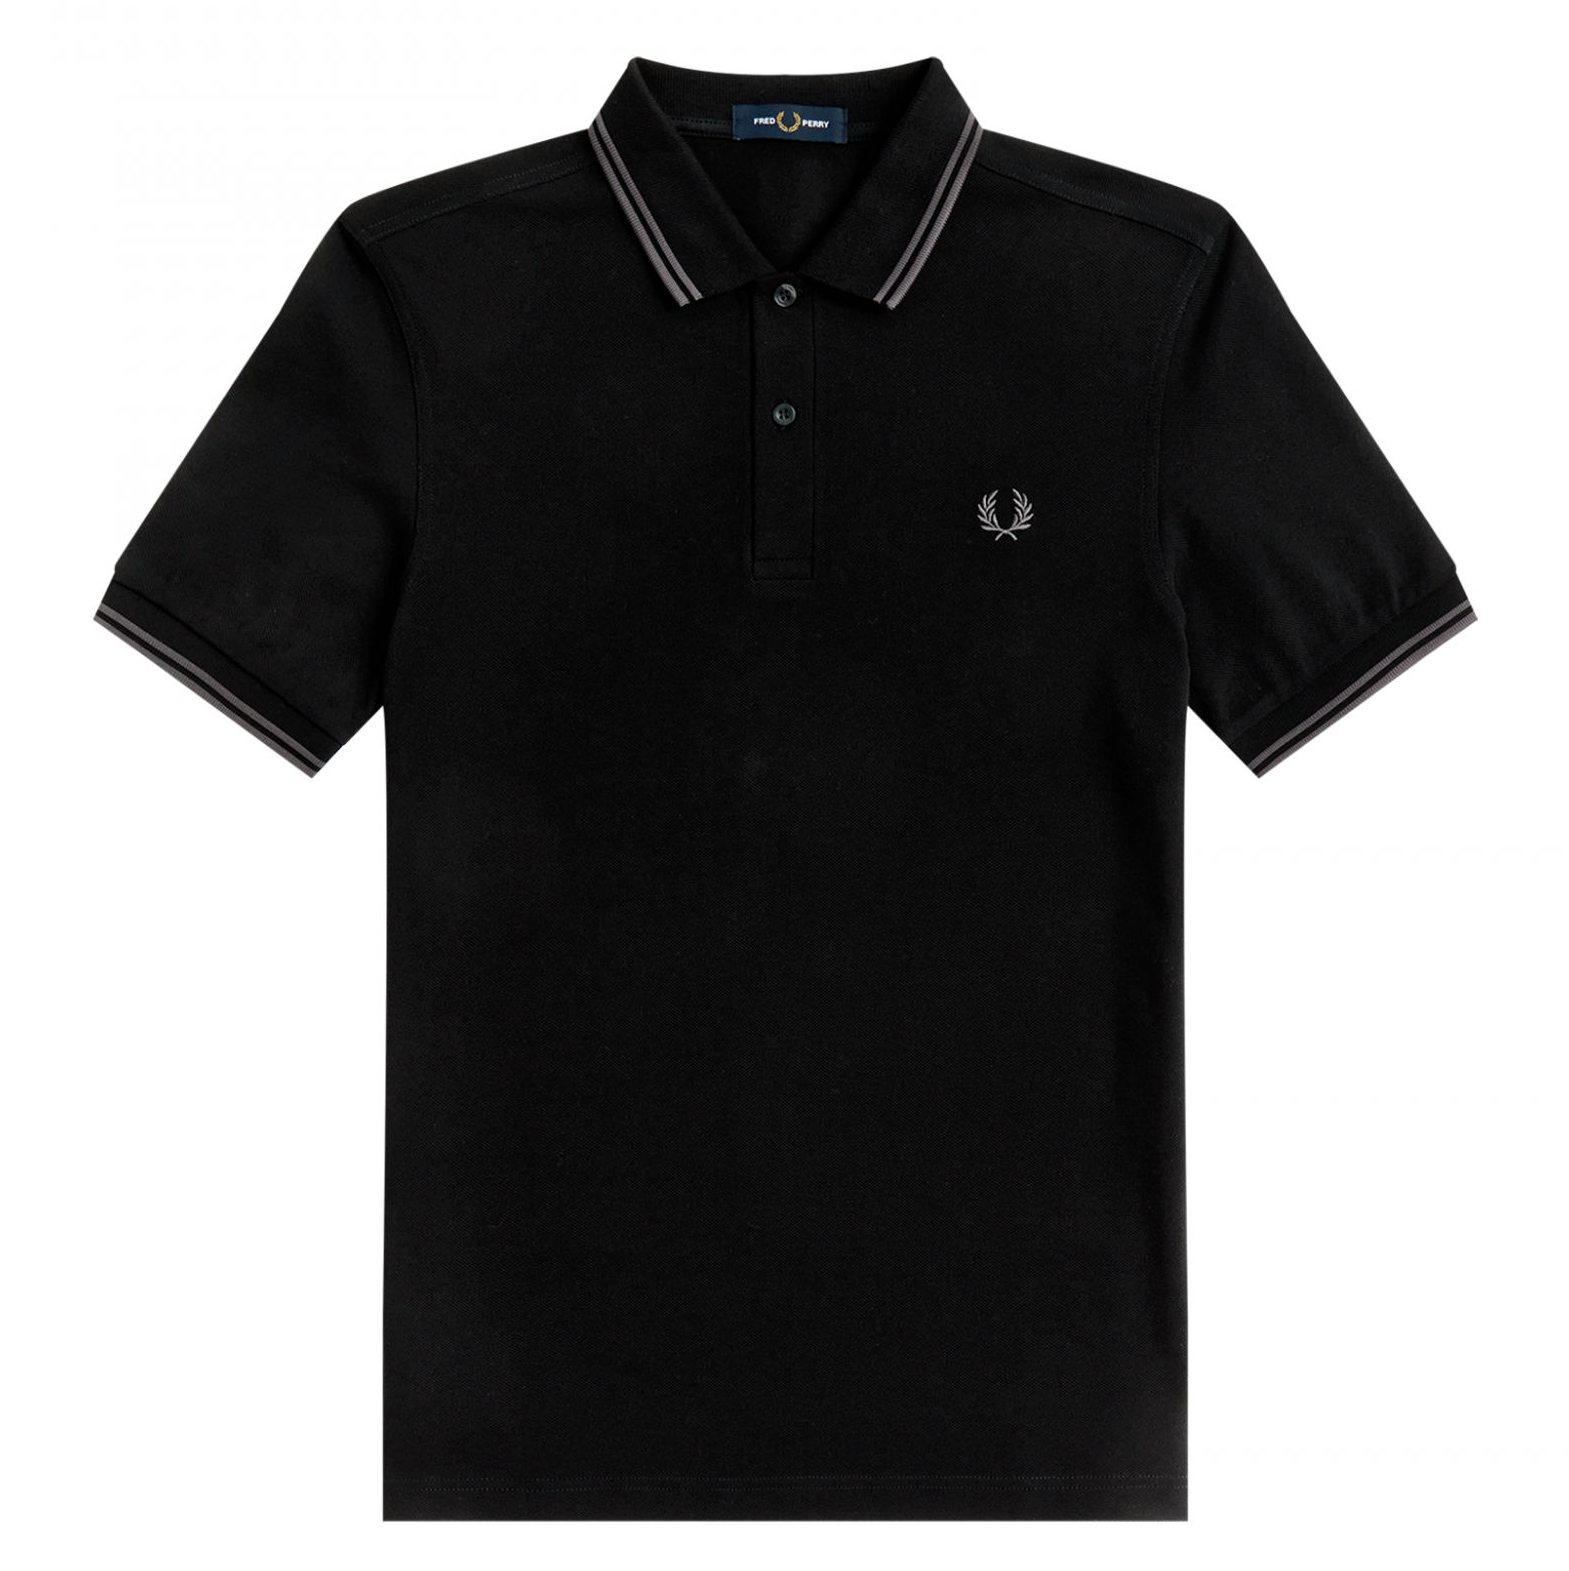 FRED PERRY TWIN TIPPED POLO SHIRT BLK/GUNMETAL